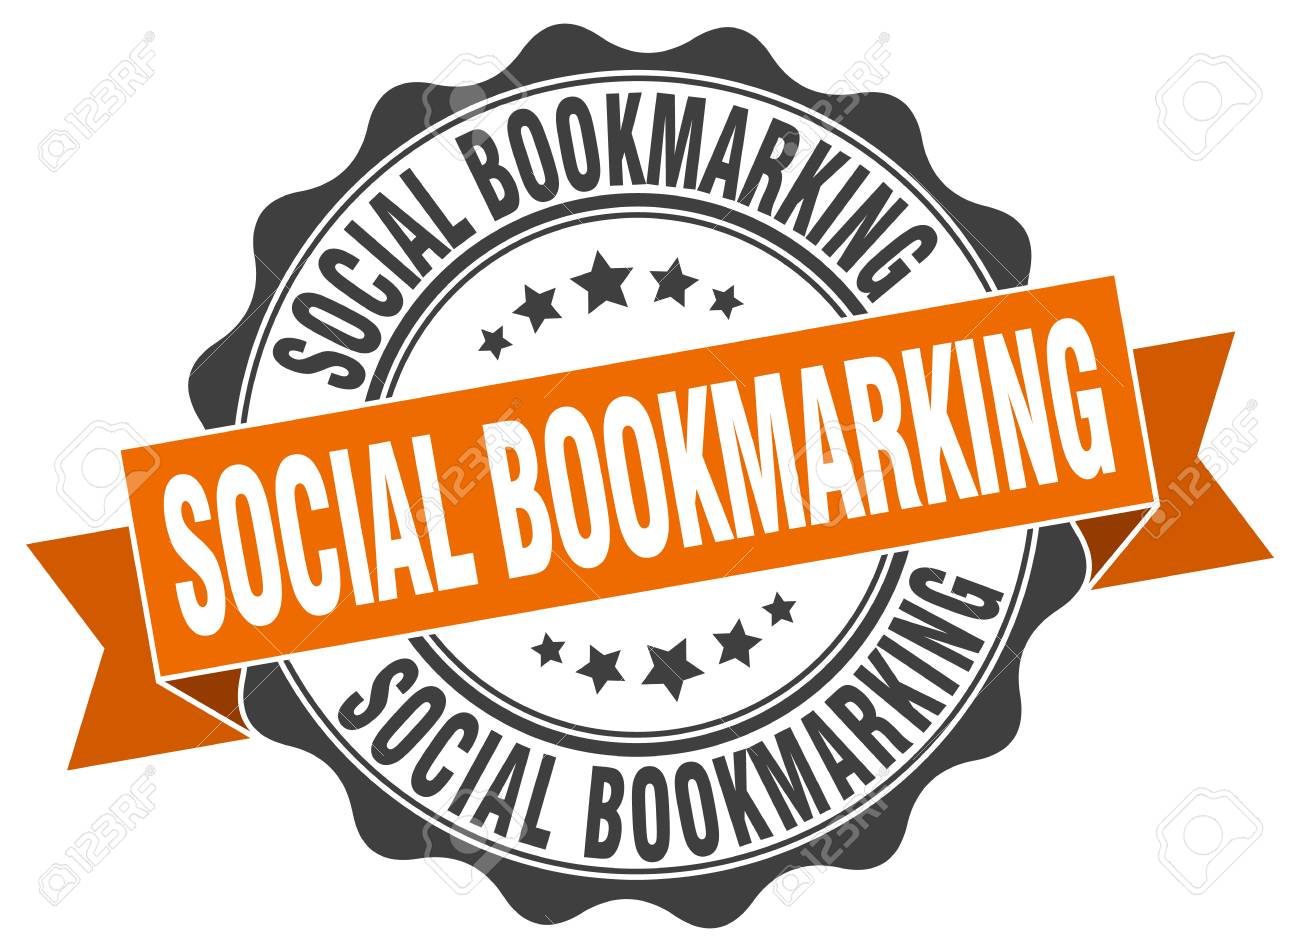 Social bookmarking round red 